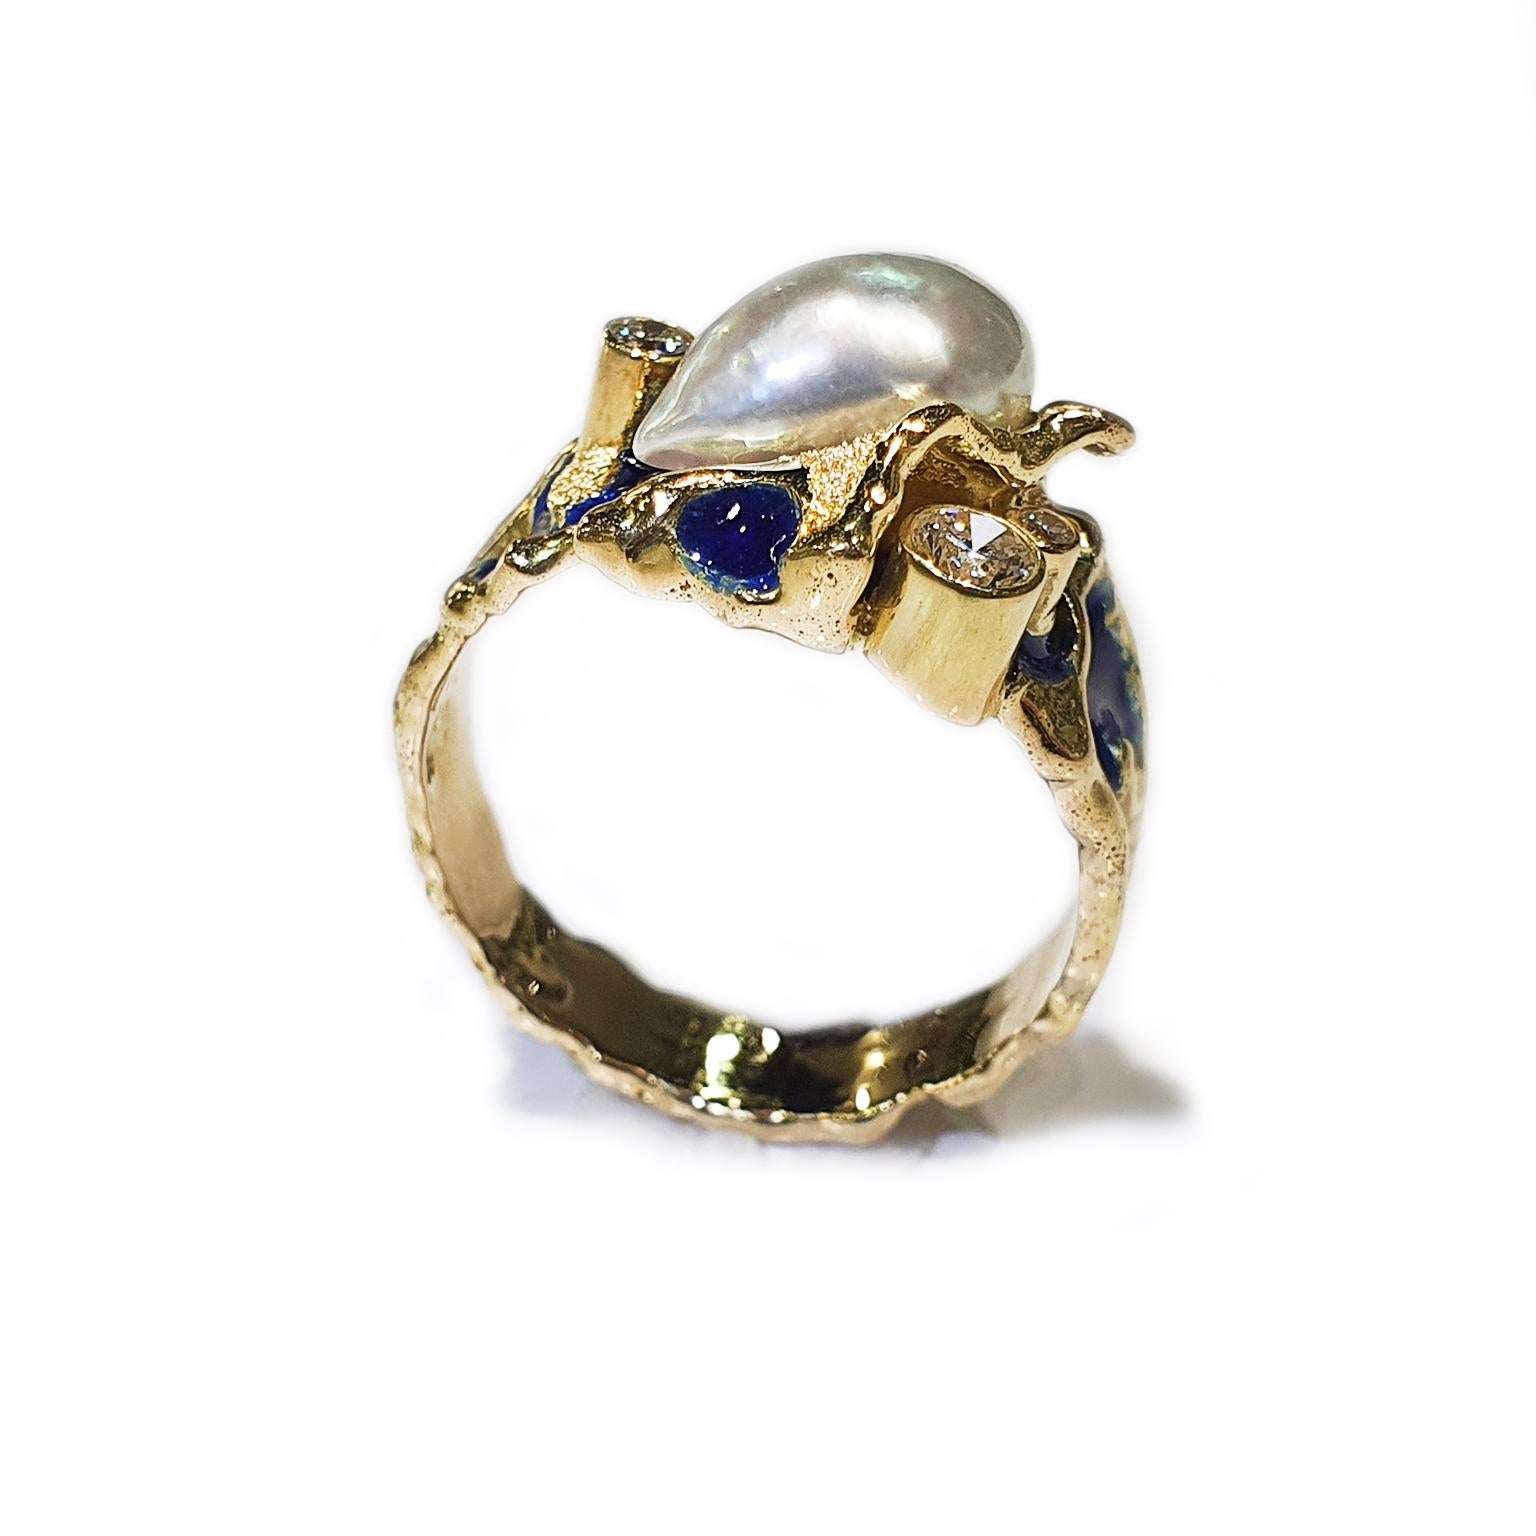 Artisan Paul Amey Signature Molten Edge, 18k Gold, Blue Enamel, Pearl and Diamond Ring For Sale